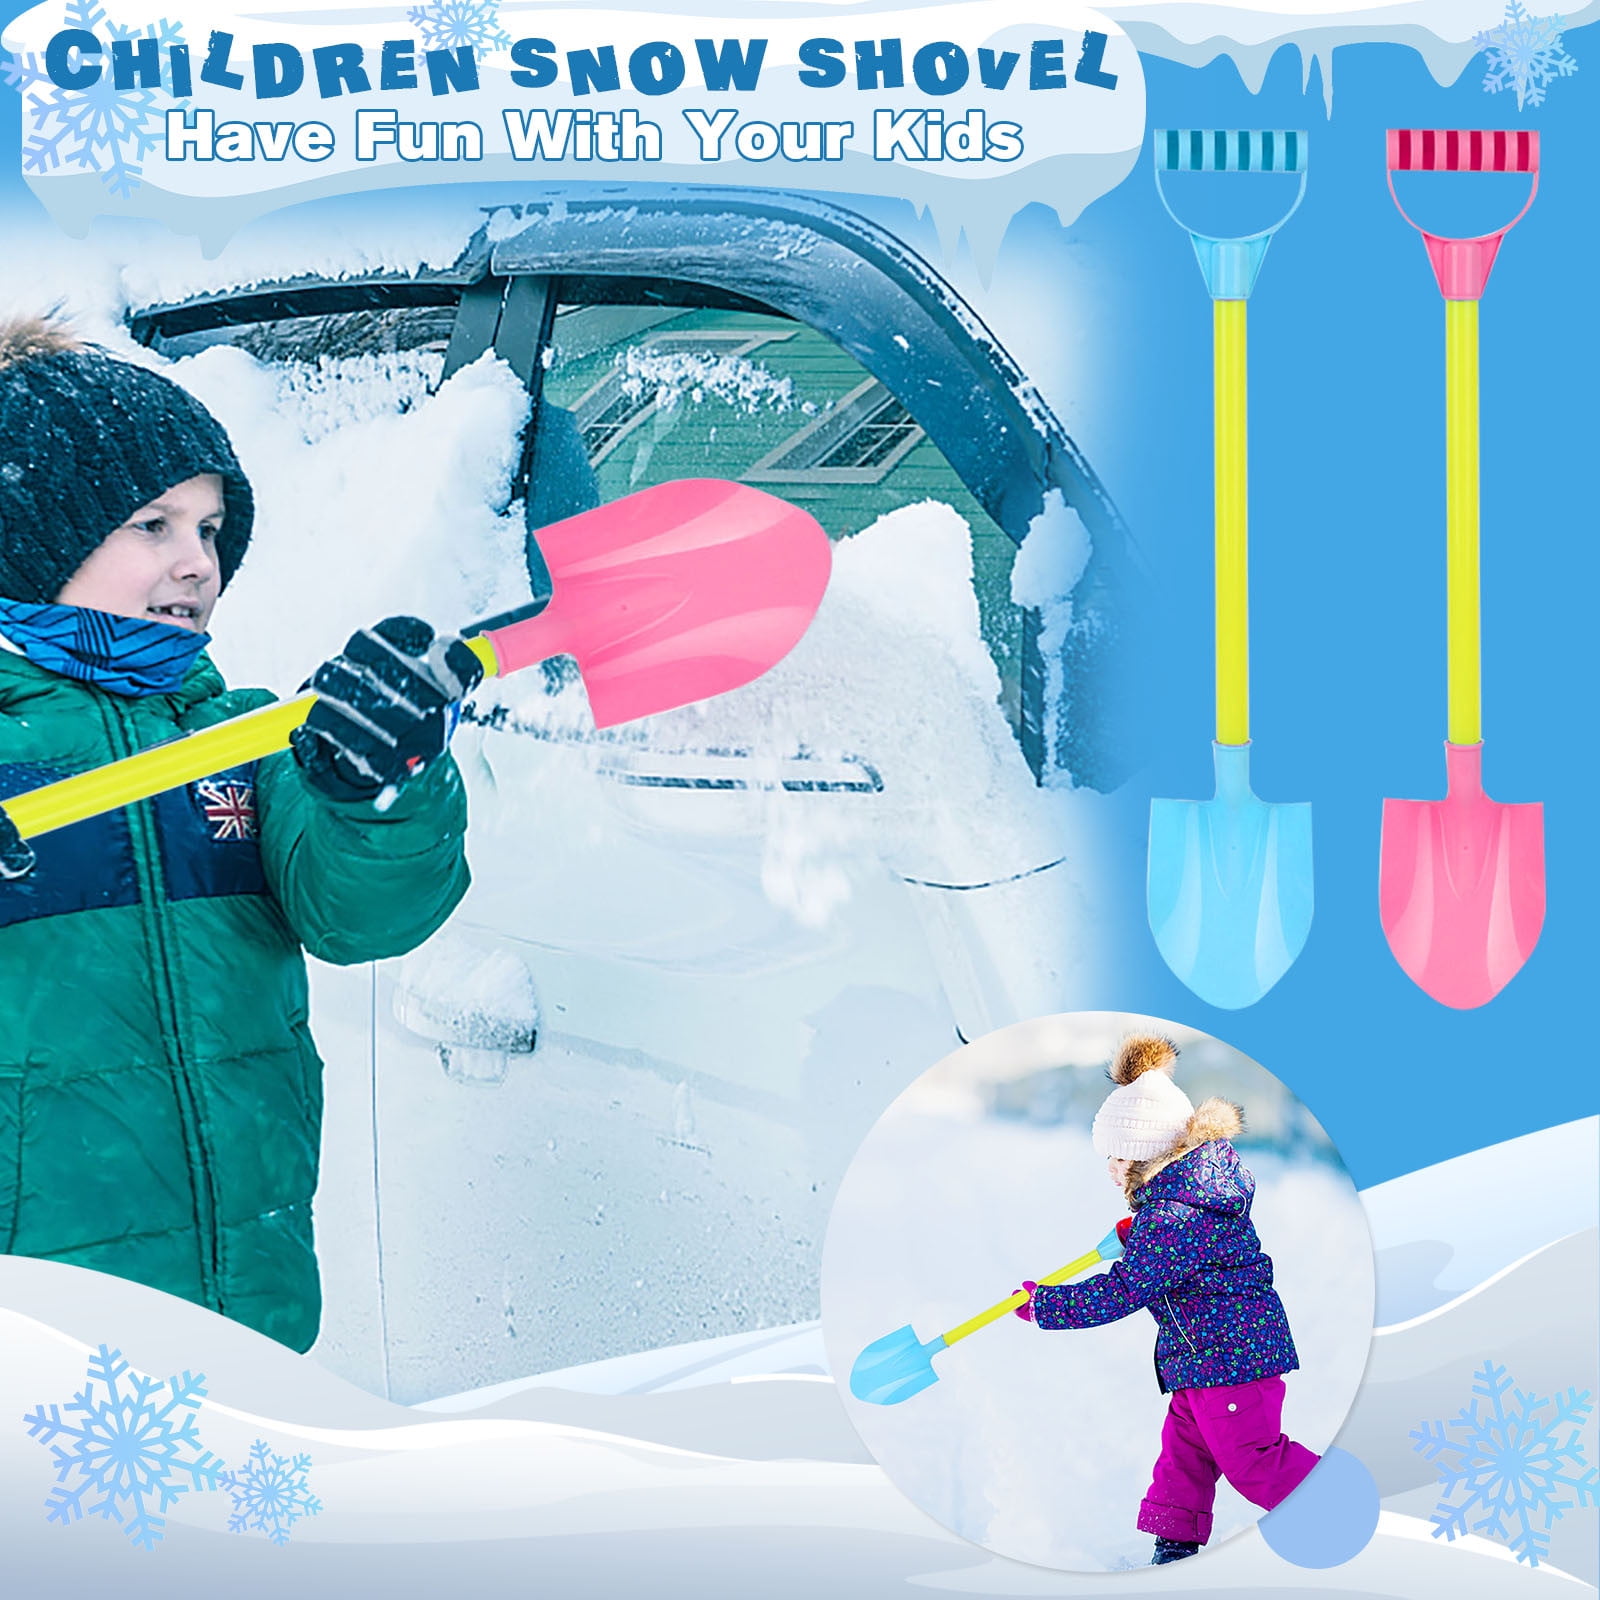 55x12CM, Green Heavy Duty Plastic Kids Snow Shovel and Beach Shovels Beach Shovels for Kids Shovel Toys with Handle for Digging Sand and Beach Fun Gift Set 